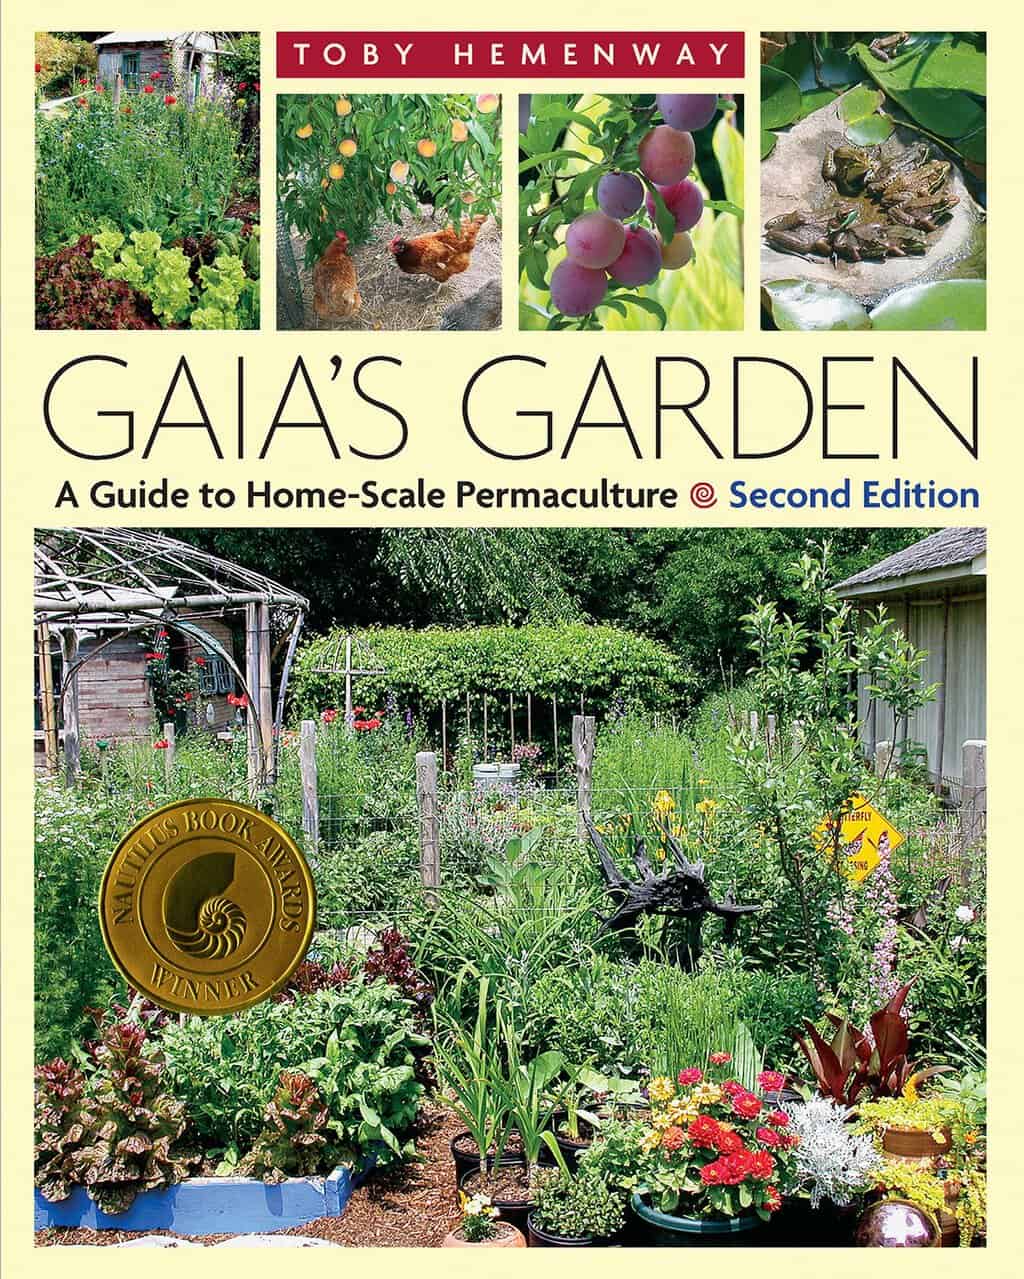 Book About Home-Scale Permaculture